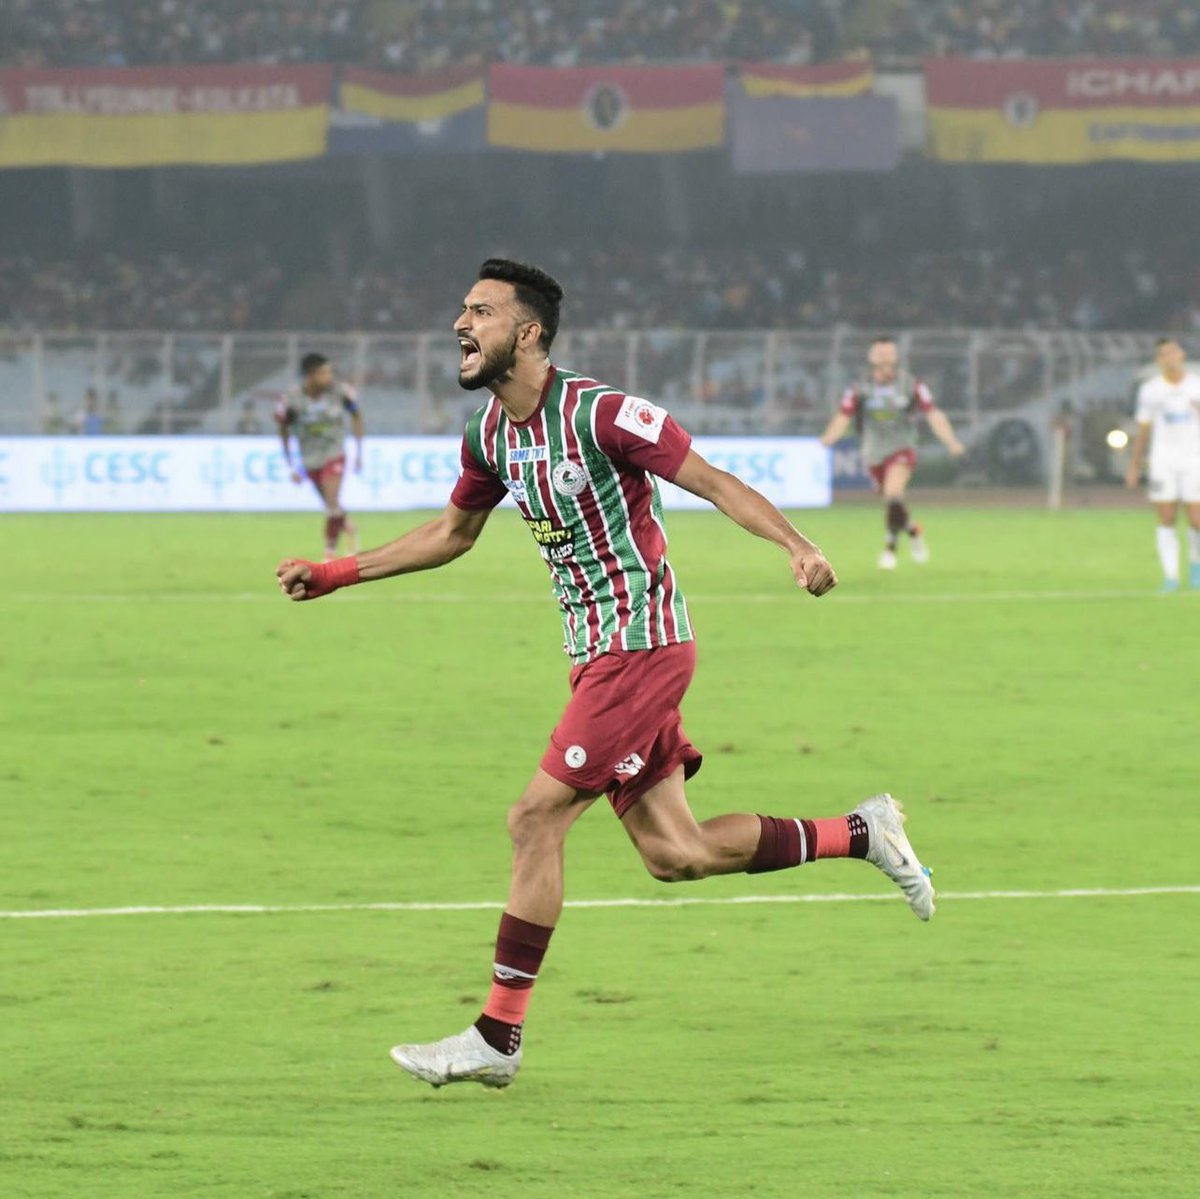 Thank you mariners for the Love and support 🙏🏻 #JoyMohunBagan